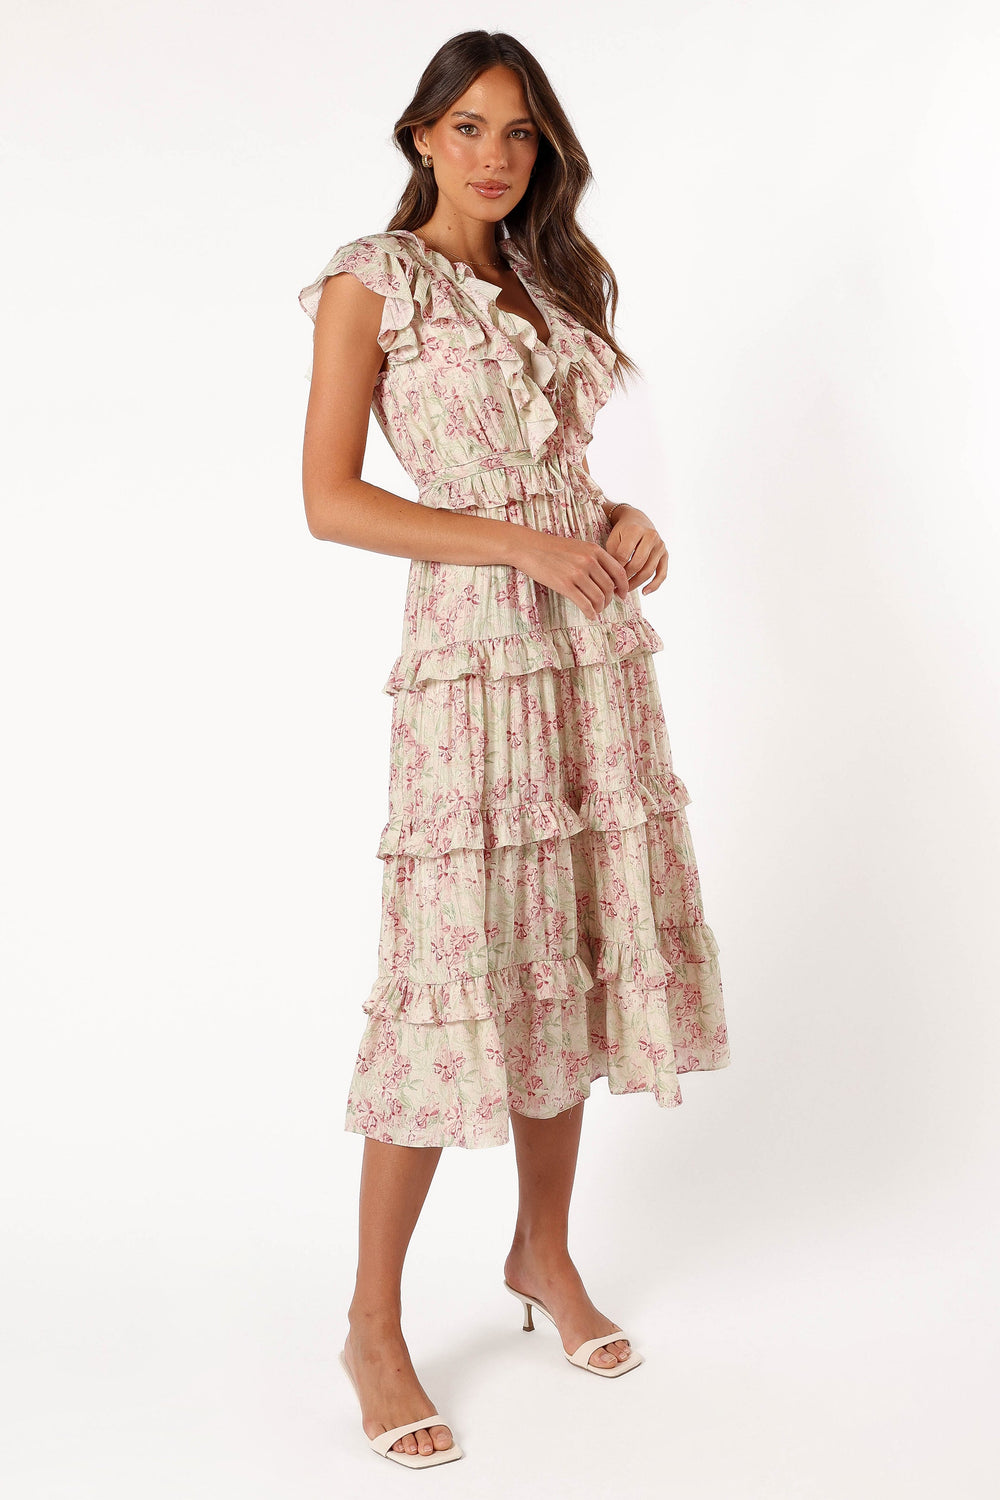 Petal and Pup USA DRESSES Levelle Midi Ruffle Dress - Ivory/Red Green Floral